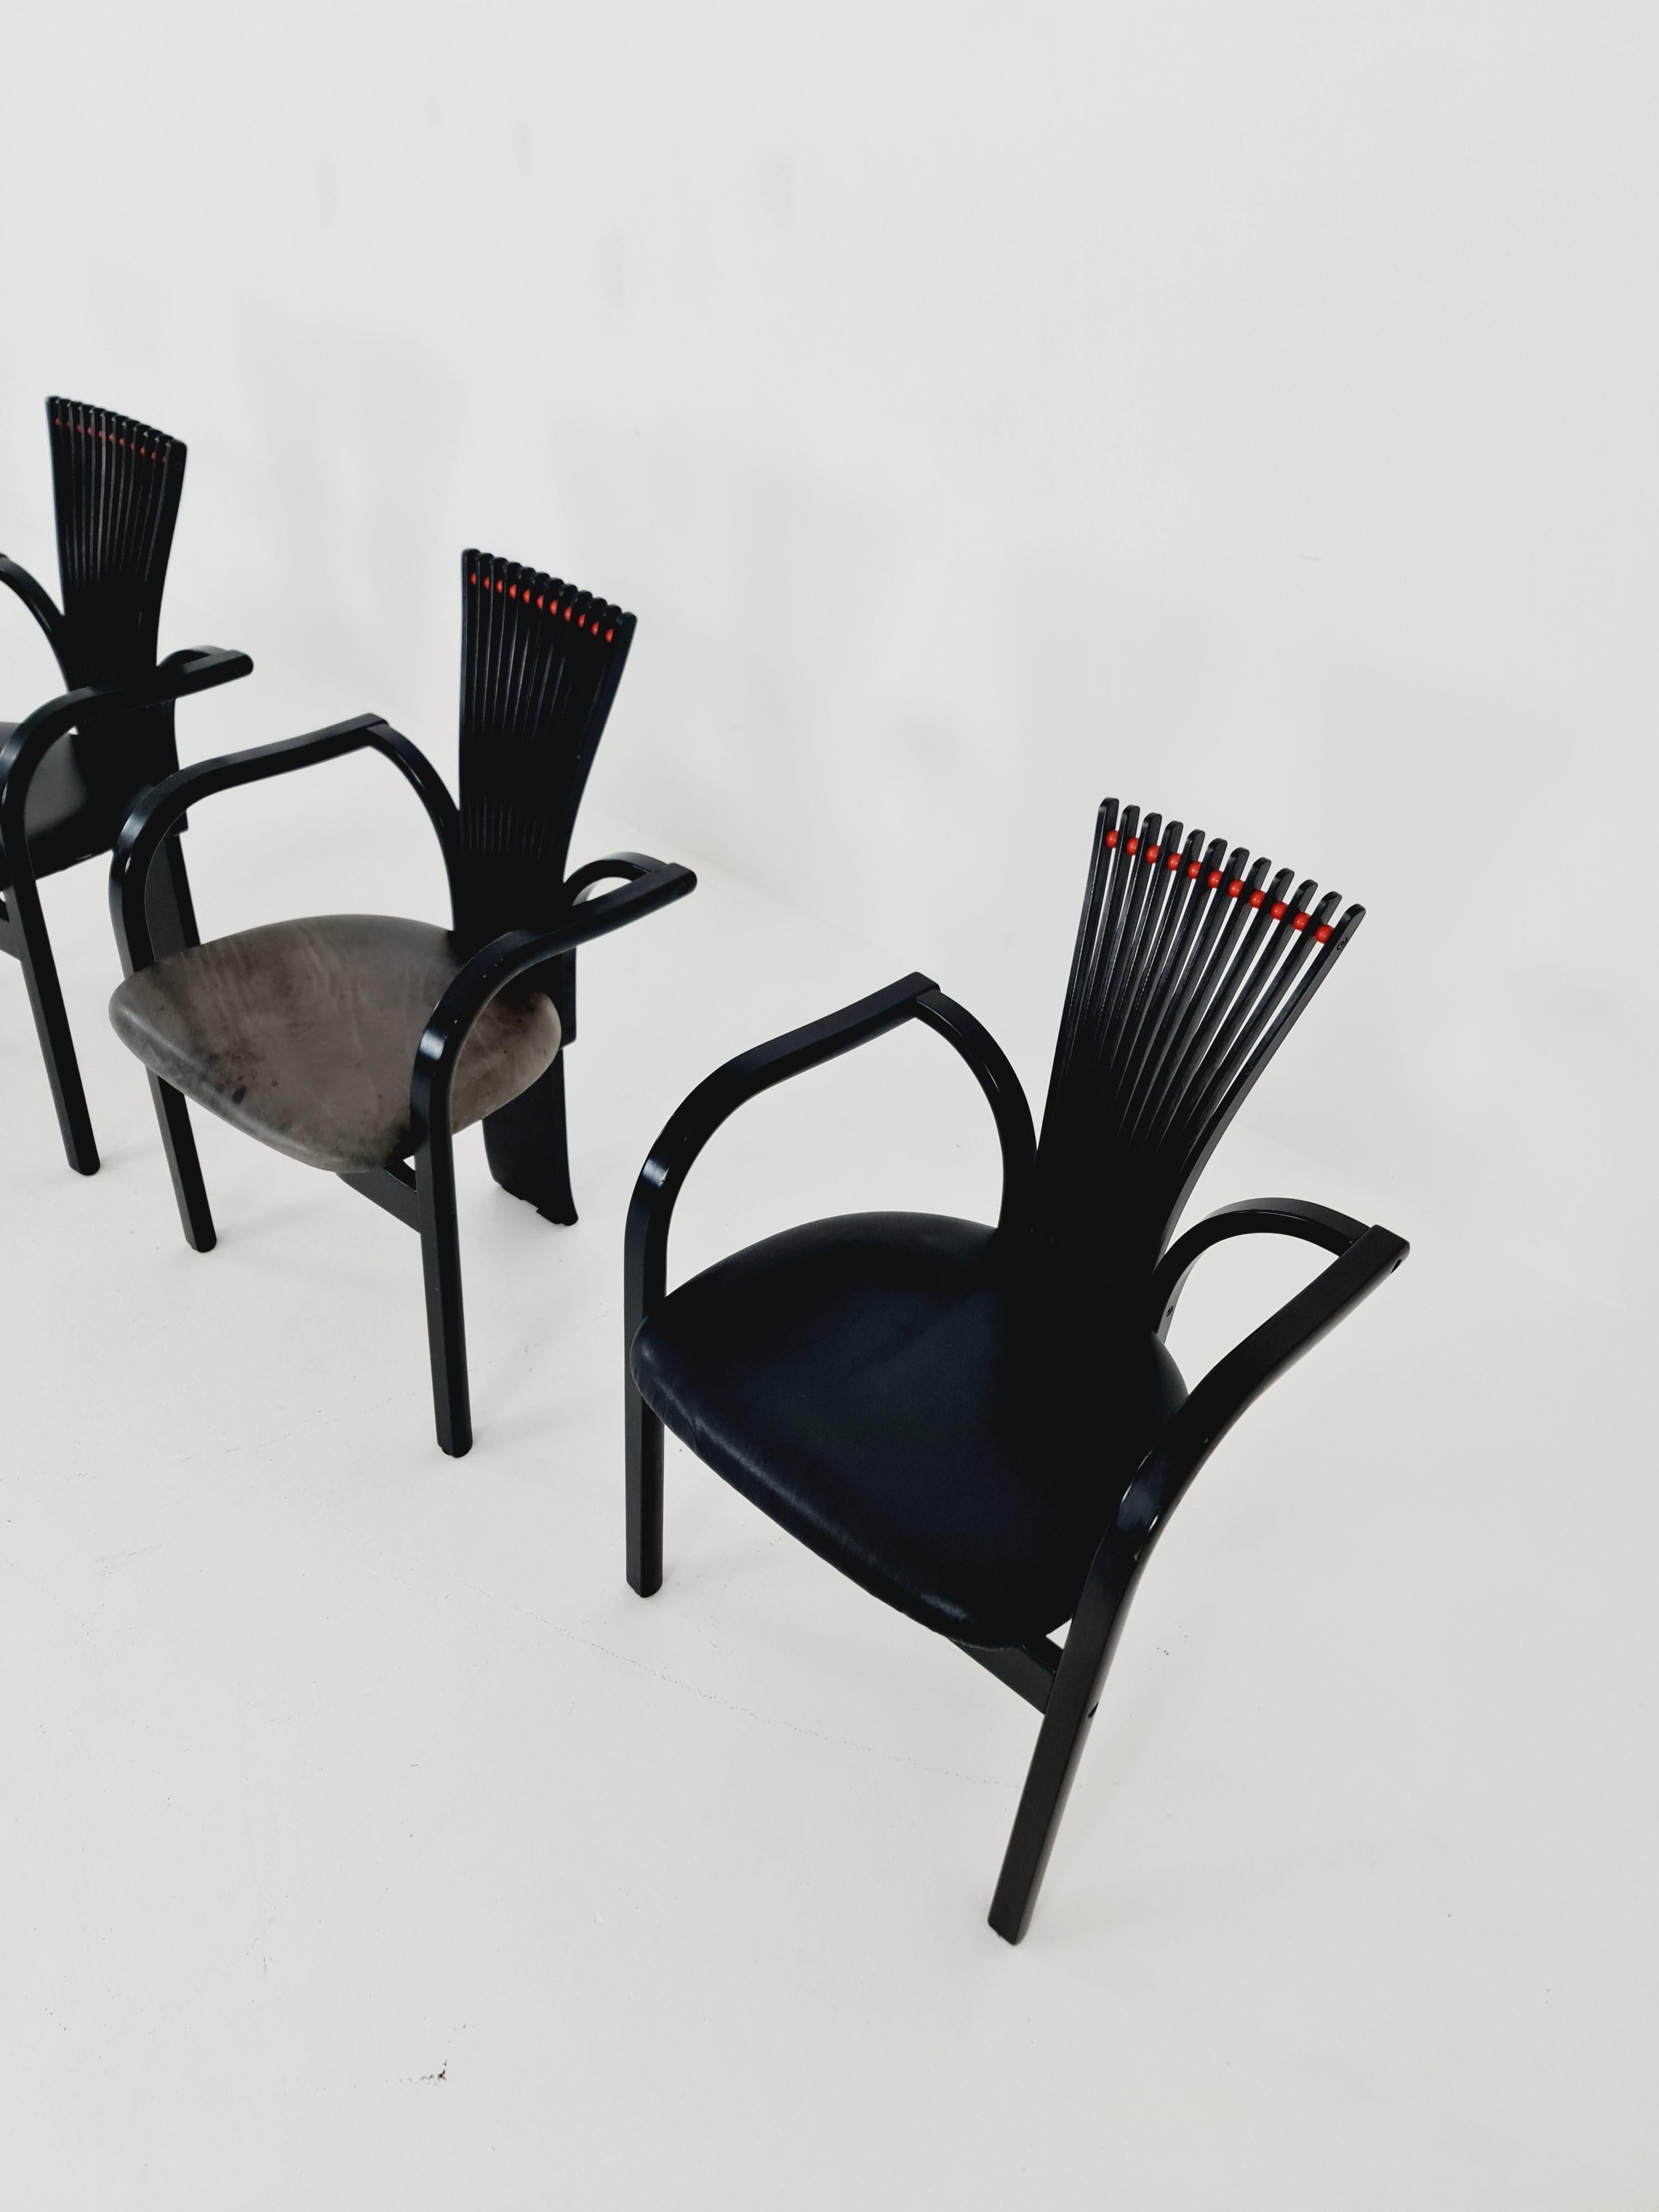 4 Totem dining chairs by Torstein Nilsen for Westnofa, Italian design table For Sale 6